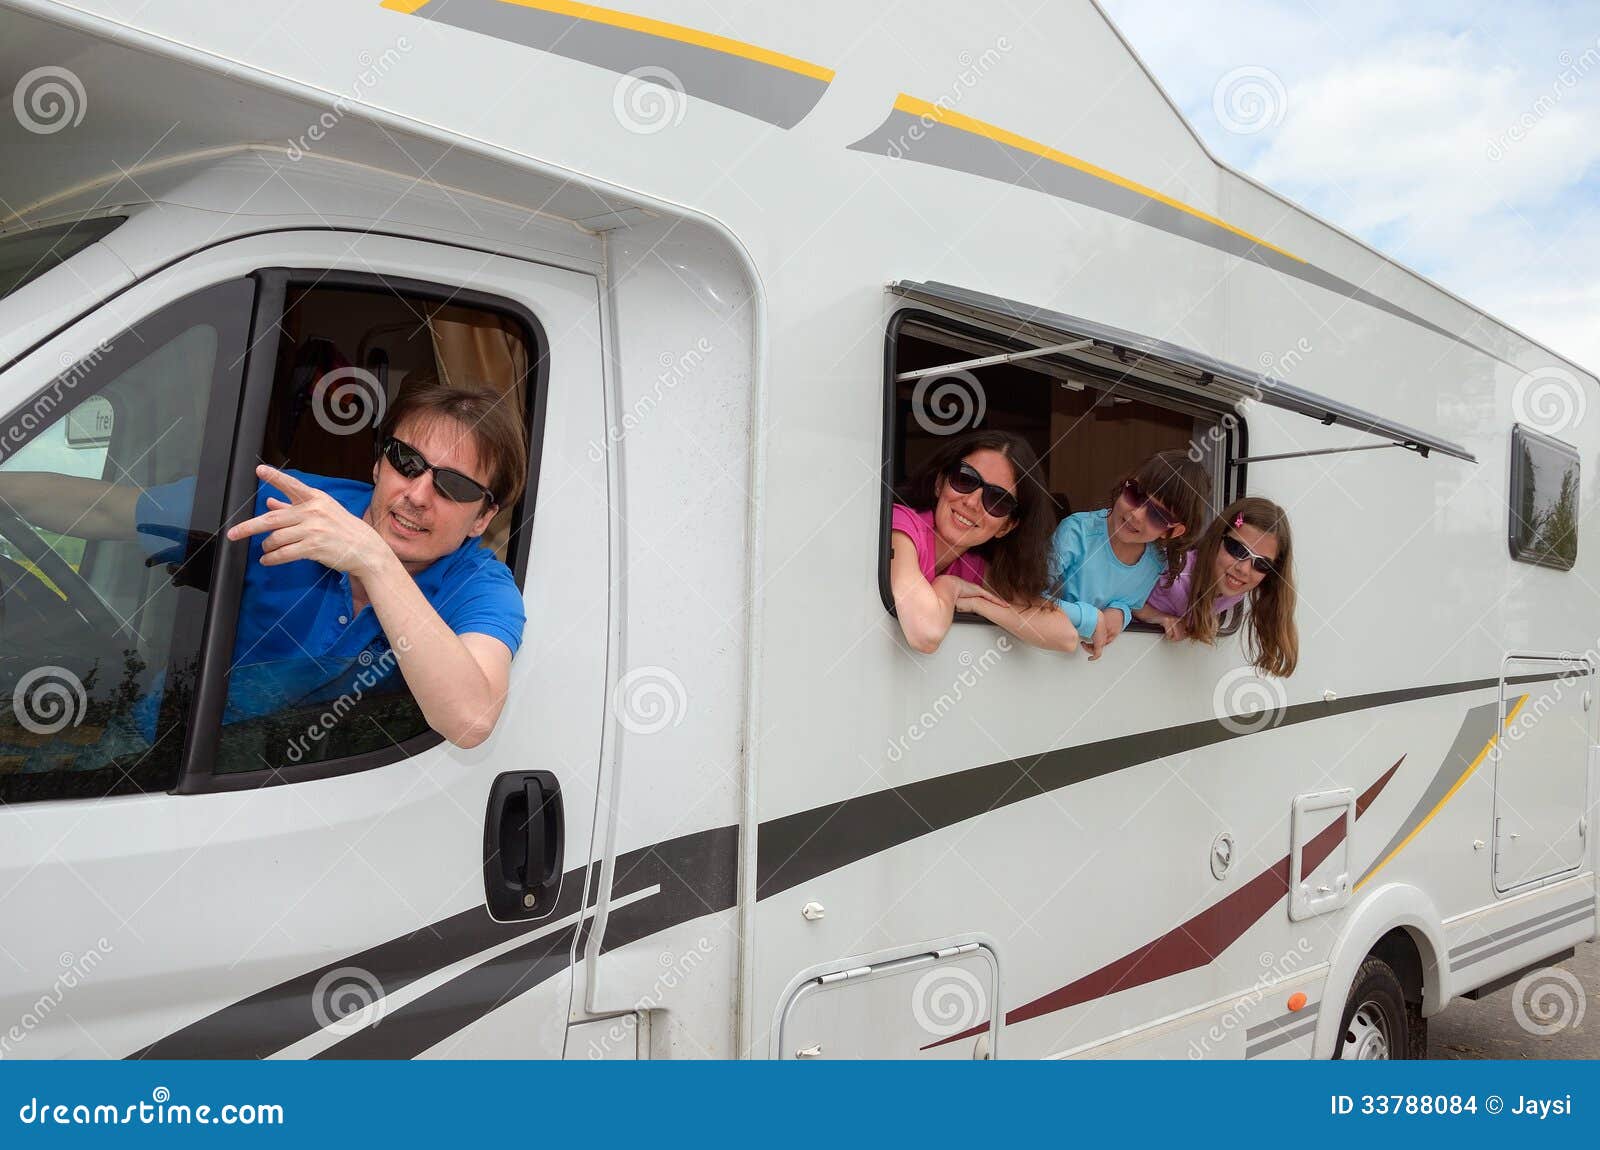 Family Vacation, RV Camper Travel With Kids, Parents With 